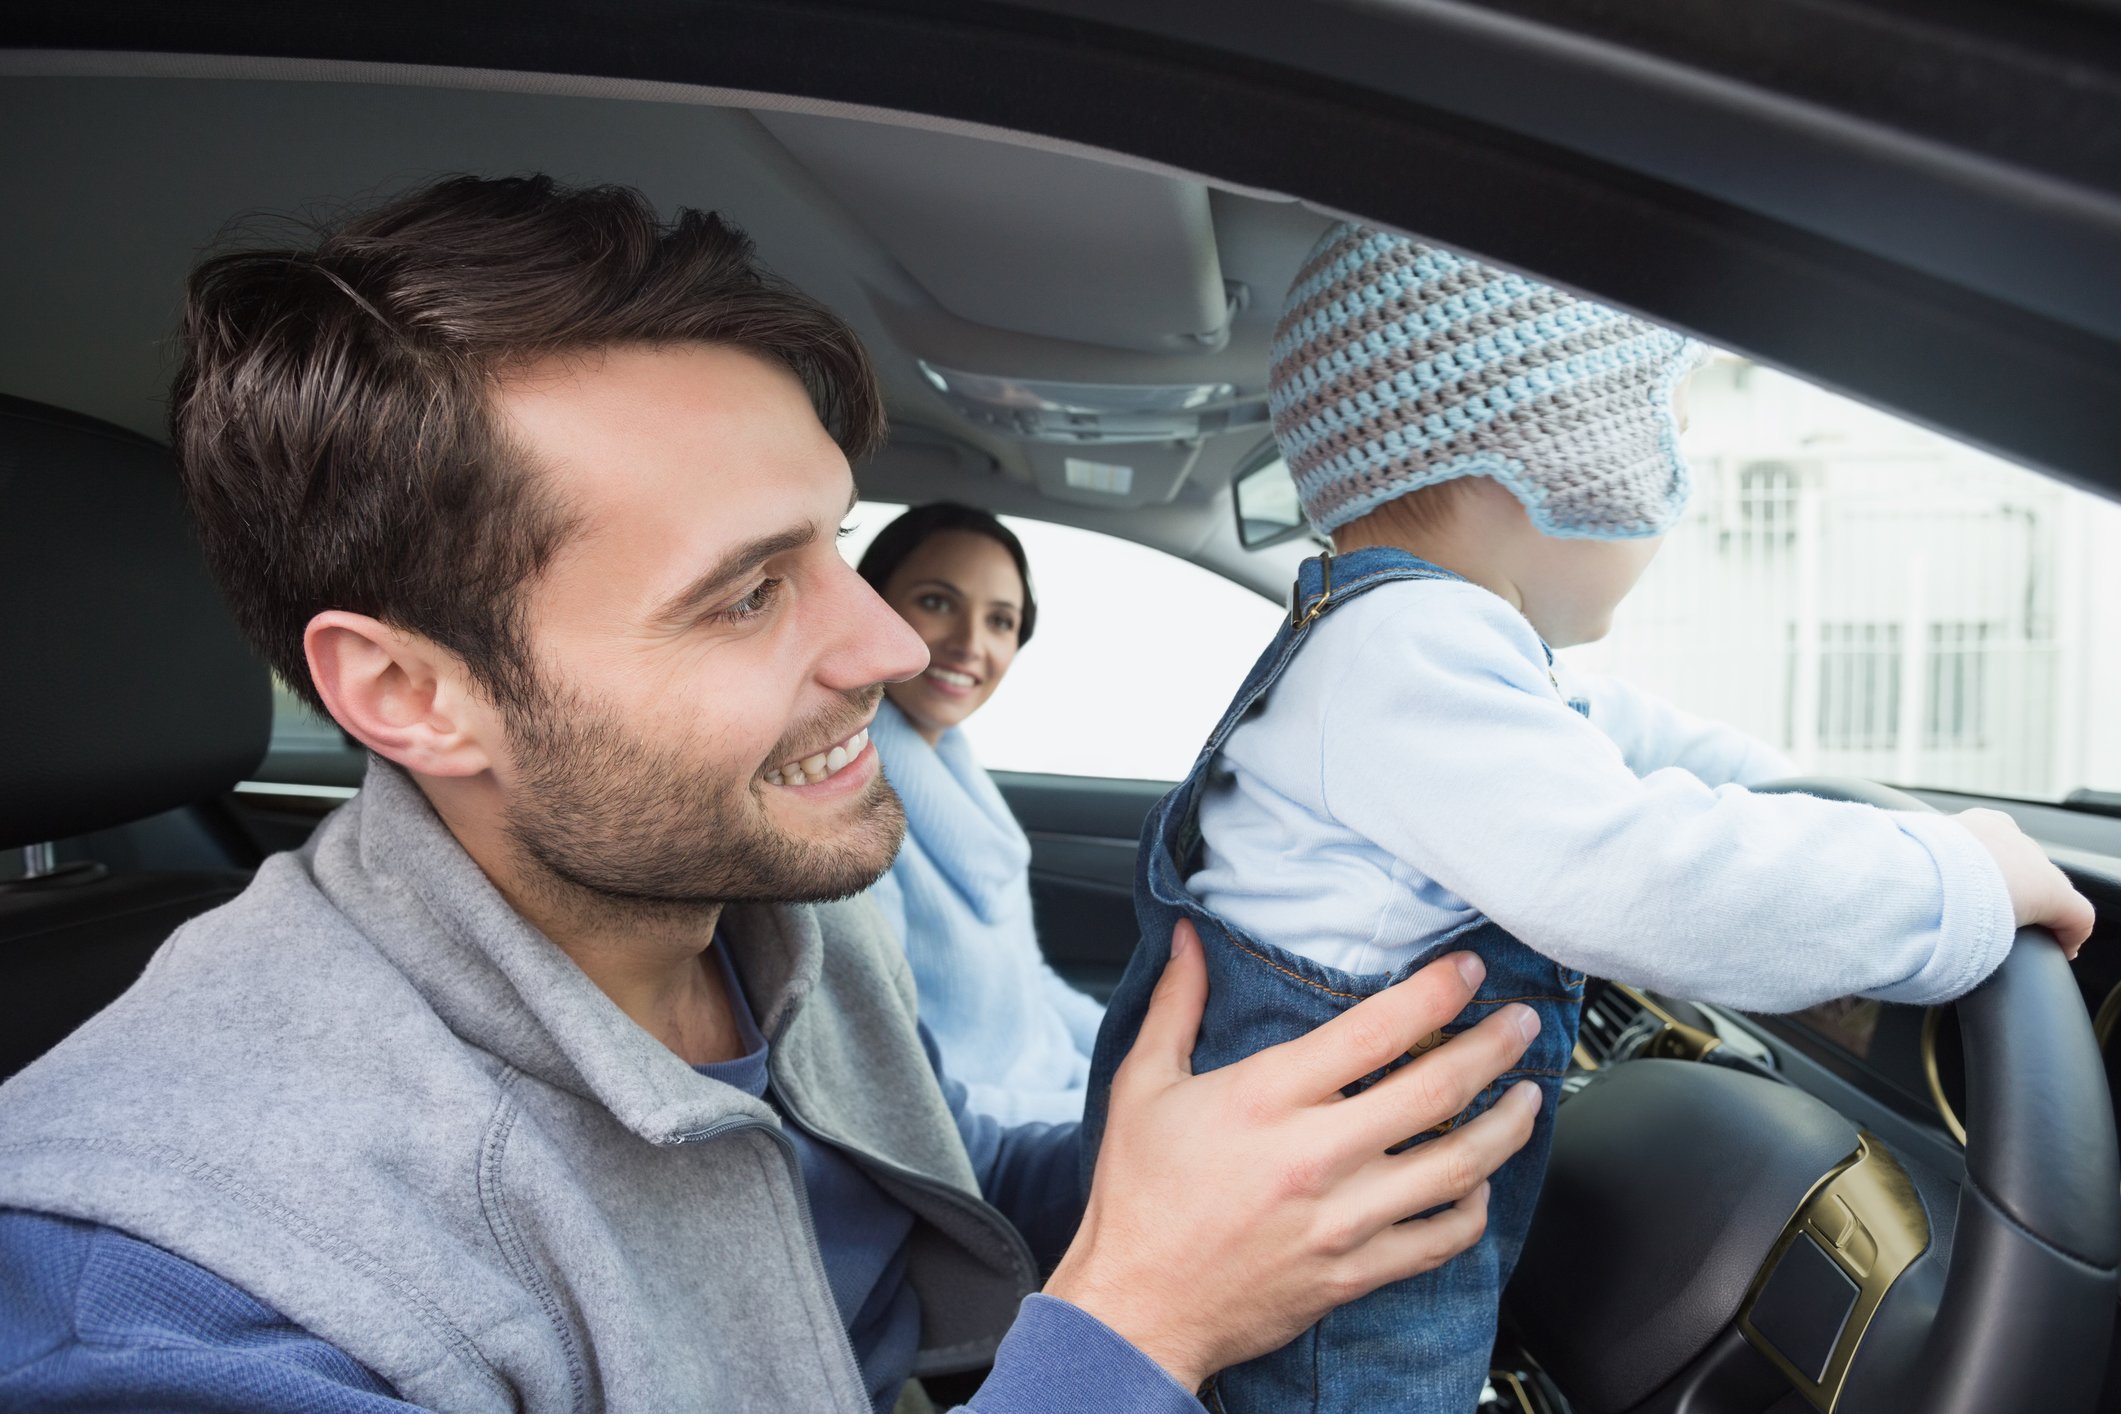 A new study suggests that dangerous driving runs in the family.